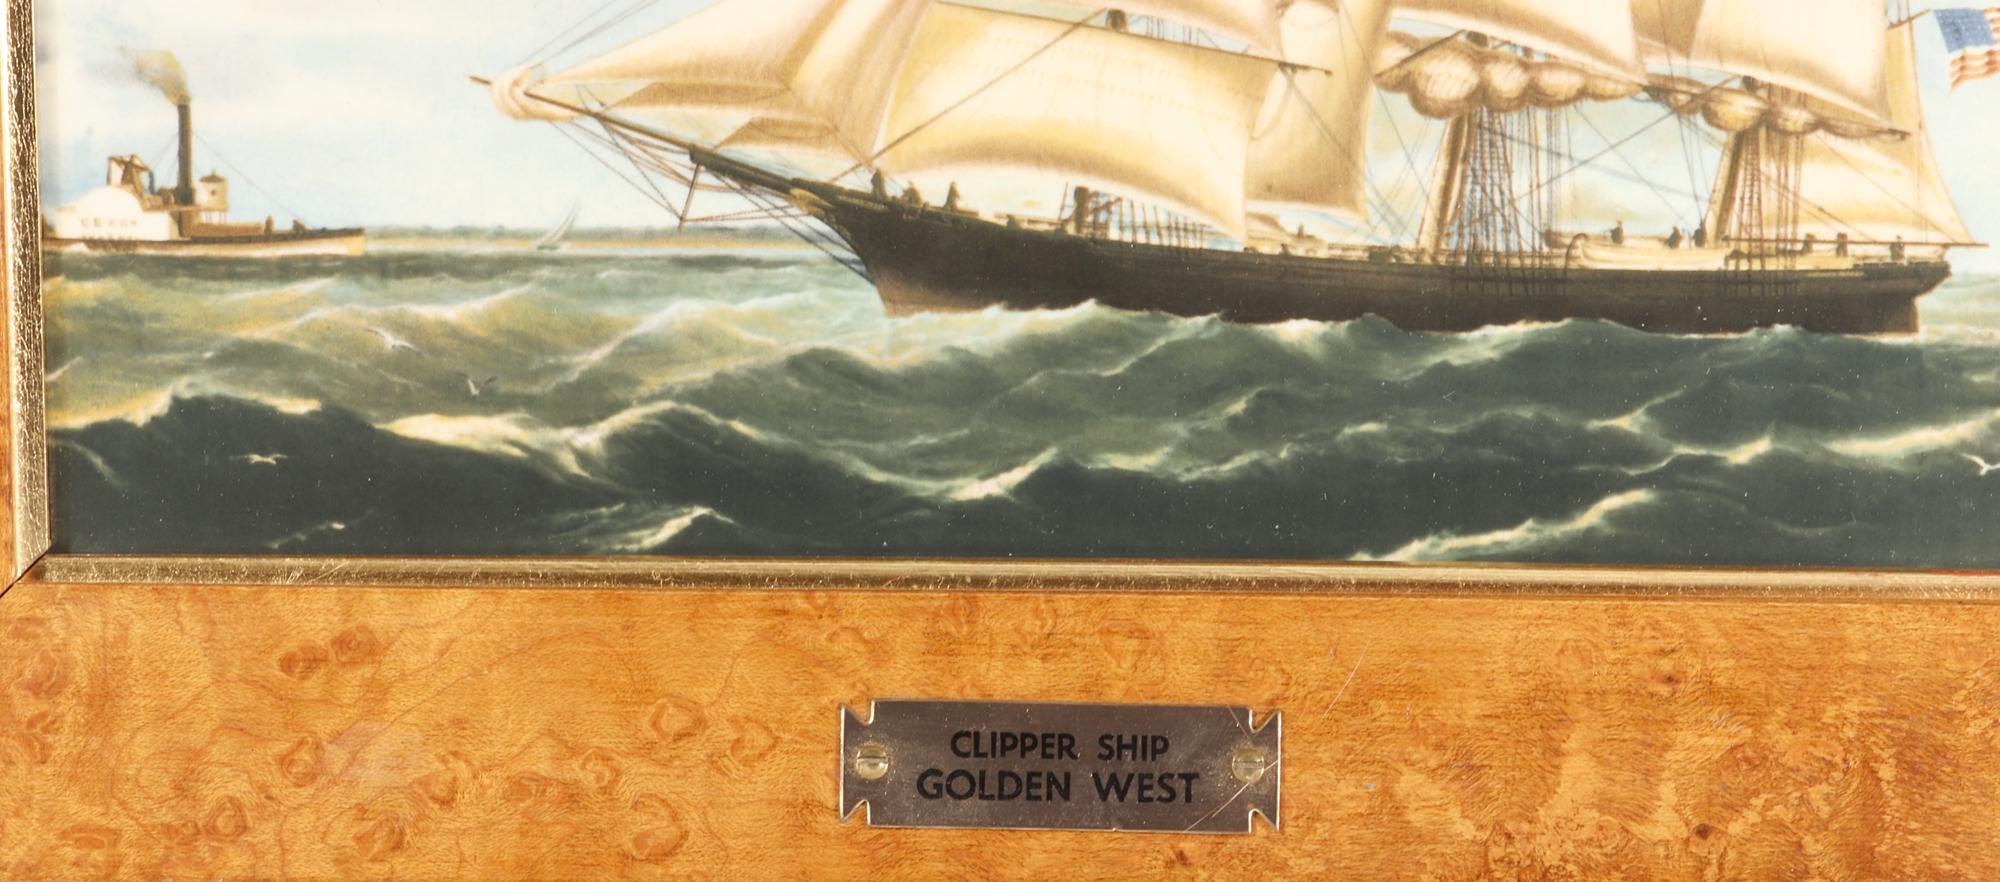 Wedgwood Porcelain Paintd Plaque of the clipper ship, 
Golden West,
1976-1981

The Wedgwood porcelain plaque is painted with a portside view of The clipper ship The Golden West within an original maple veneered wood frame. In the background is